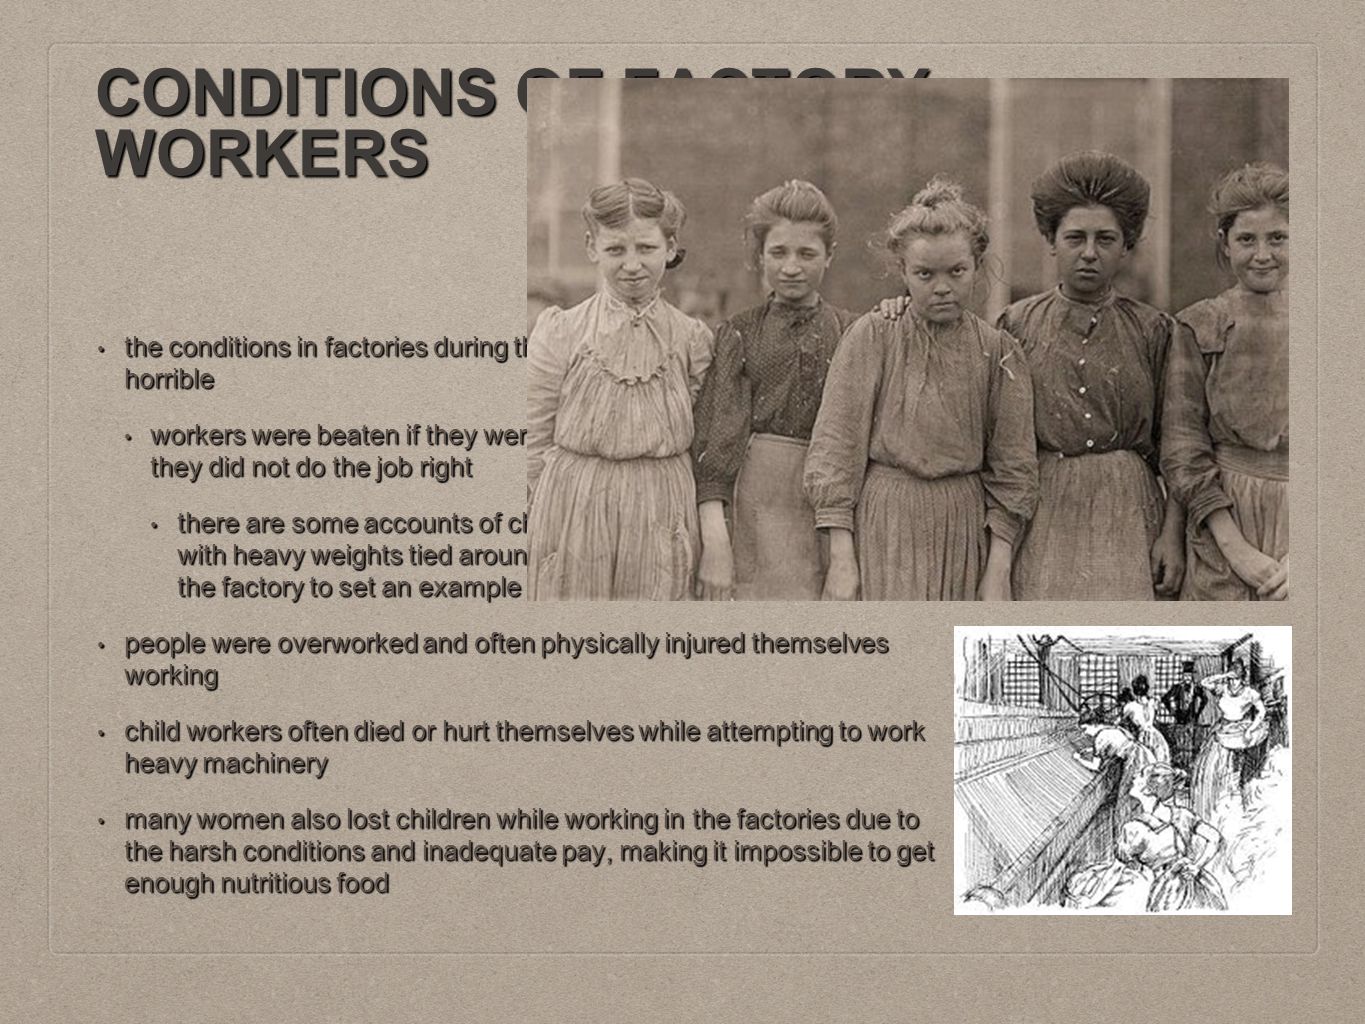 CONDITIONS OF FACTORY WORKERS the conditions in factories during the First Industrial Revolution were horrible the conditions in factories during the First Industrial Revolution were horrible workers were beaten if they were late, fell asleep on the job, or if they did not do the job right workers were beaten if they were late, fell asleep on the job, or if they did not do the job right there are some accounts of children who are late having ropes with heavy weights tied around their necks and paraded around the factory to set an example there are some accounts of children who are late having ropes with heavy weights tied around their necks and paraded around the factory to set an example people were overworked and often physically injured themselves working people were overworked and often physically injured themselves working child workers often died or hurt themselves while attempting to work heavy machinery child workers often died or hurt themselves while attempting to work heavy machinery many women also lost children while working in the factories due to the harsh conditions and inadequate pay, making it impossible to get enough nutritious food many women also lost children while working in the factories due to the harsh conditions and inadequate pay, making it impossible to get enough nutritious food